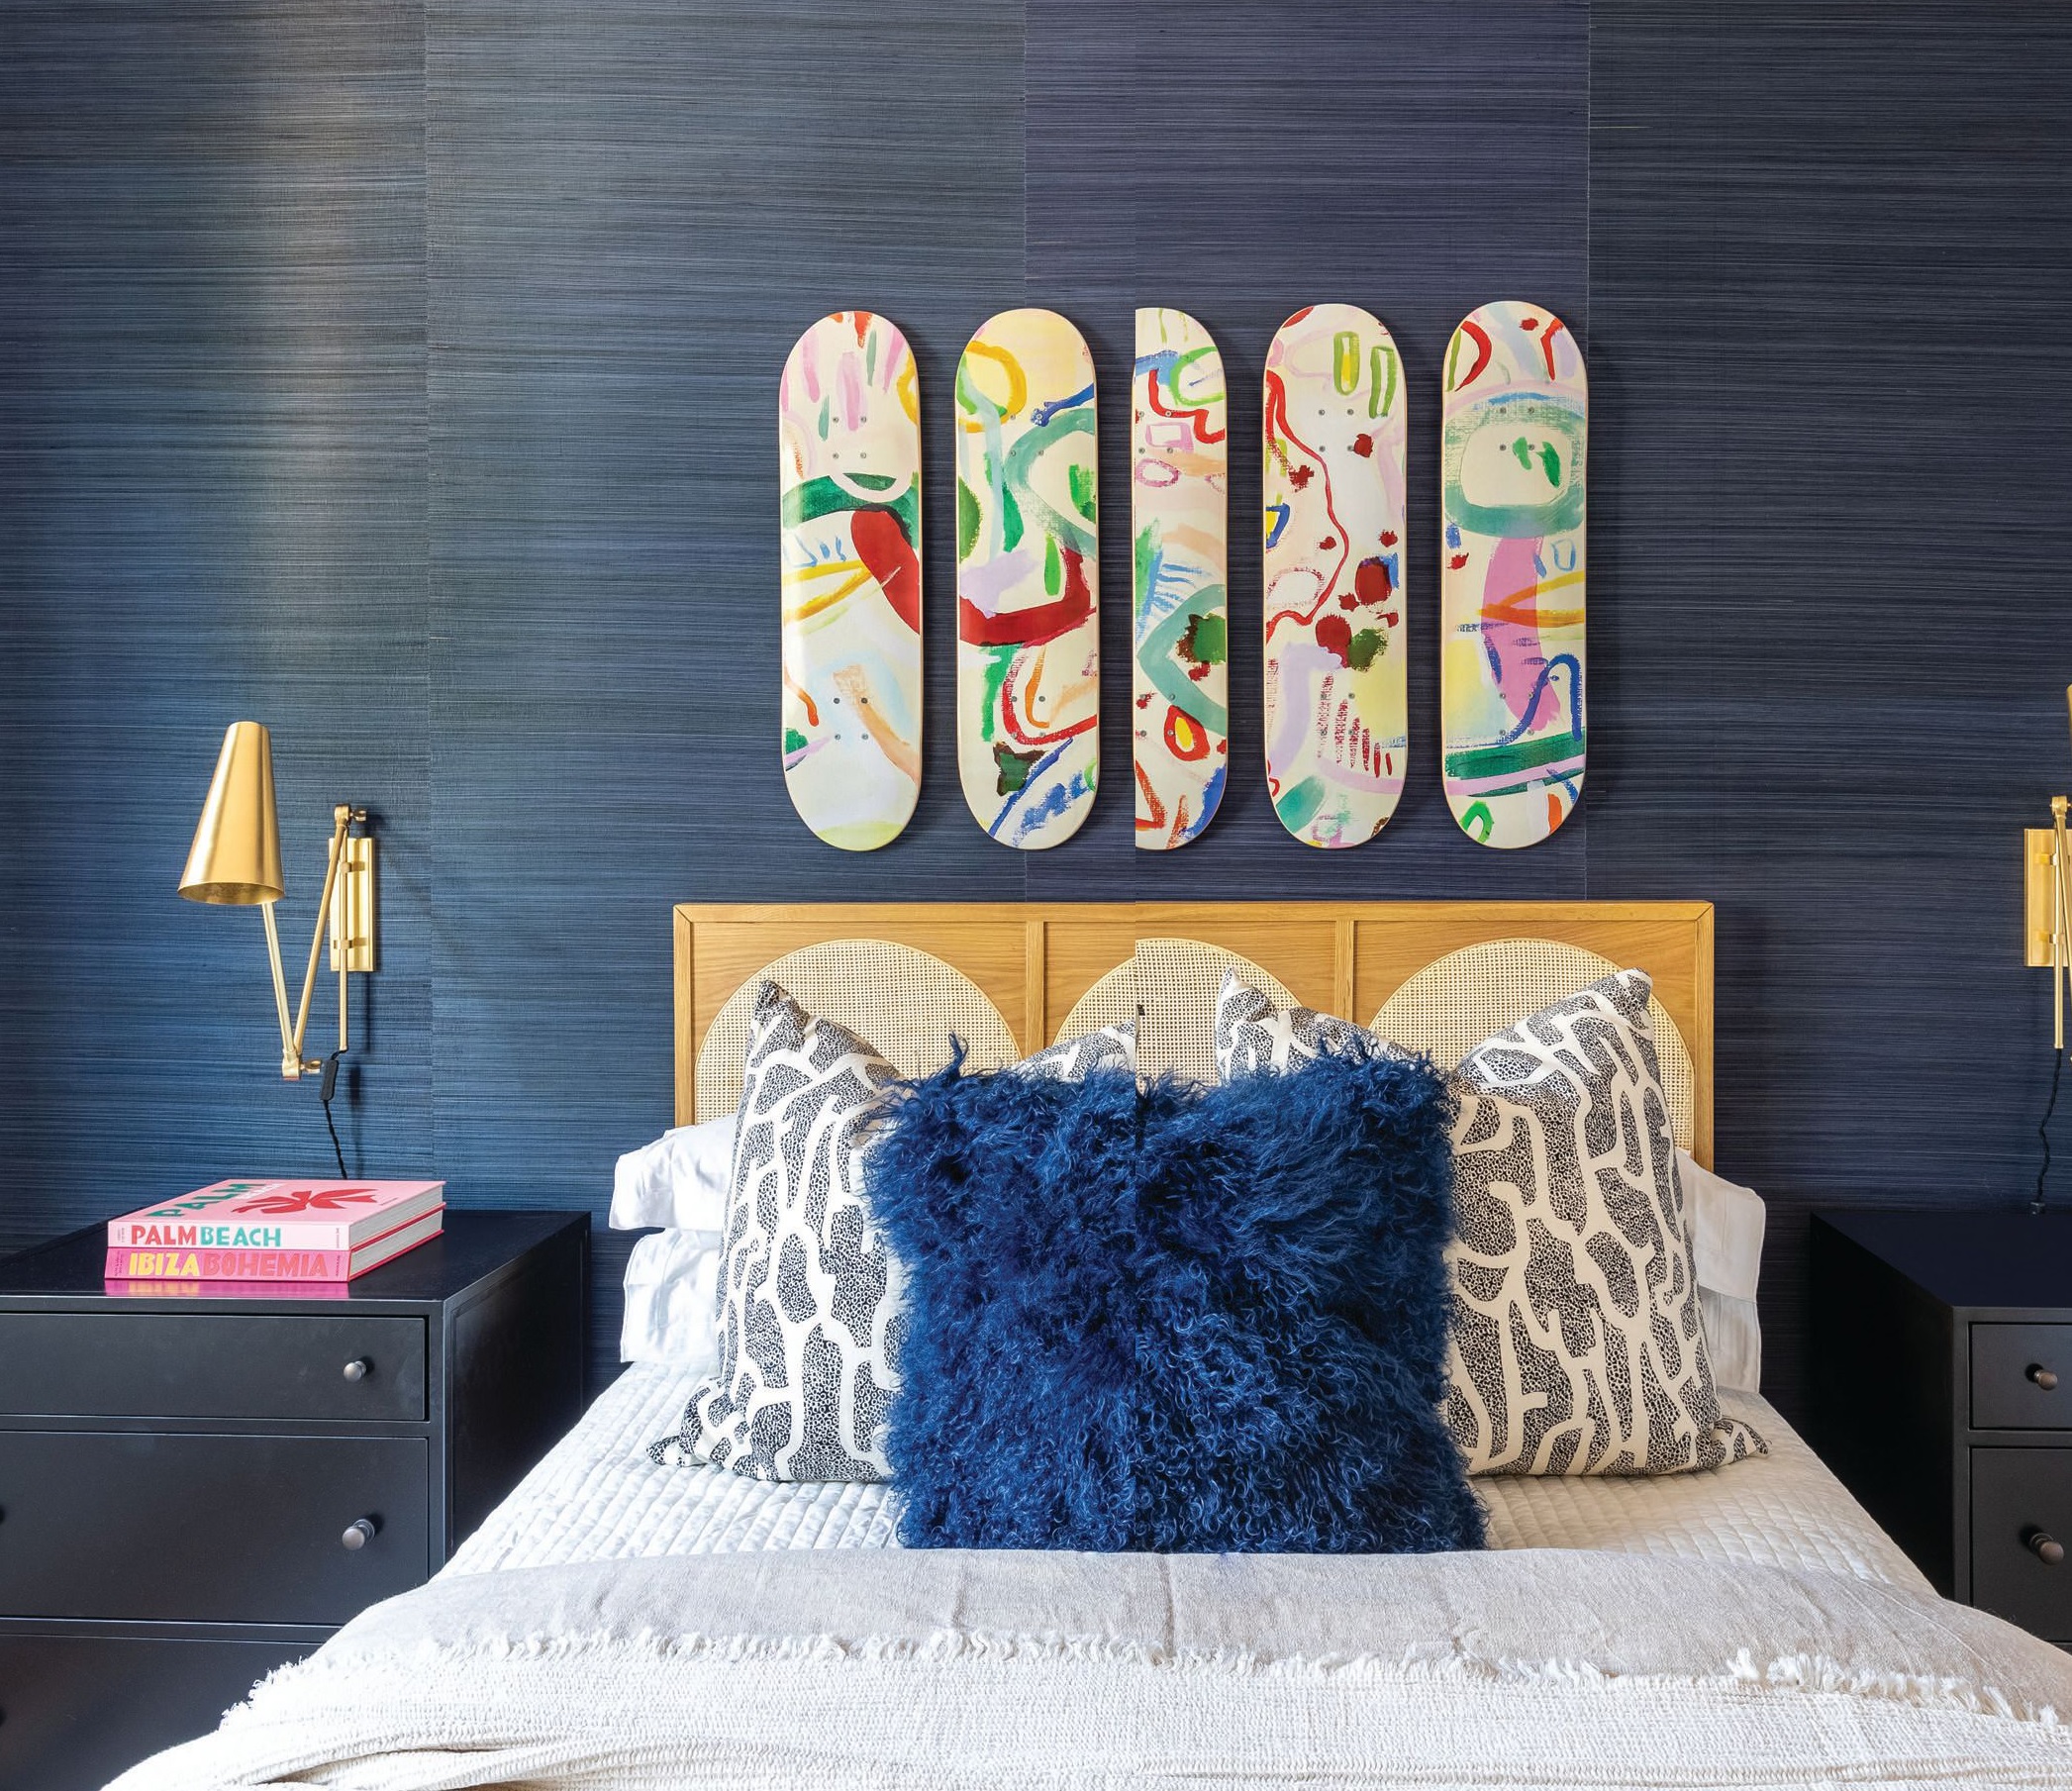 One of the daughters requested a beachy bedroom, and Yeates delivered a unique take on the idea via deep-blue Schumacher wallpaper and surfboard-inspired art from Etsy. Photographed by Flourish Photography 